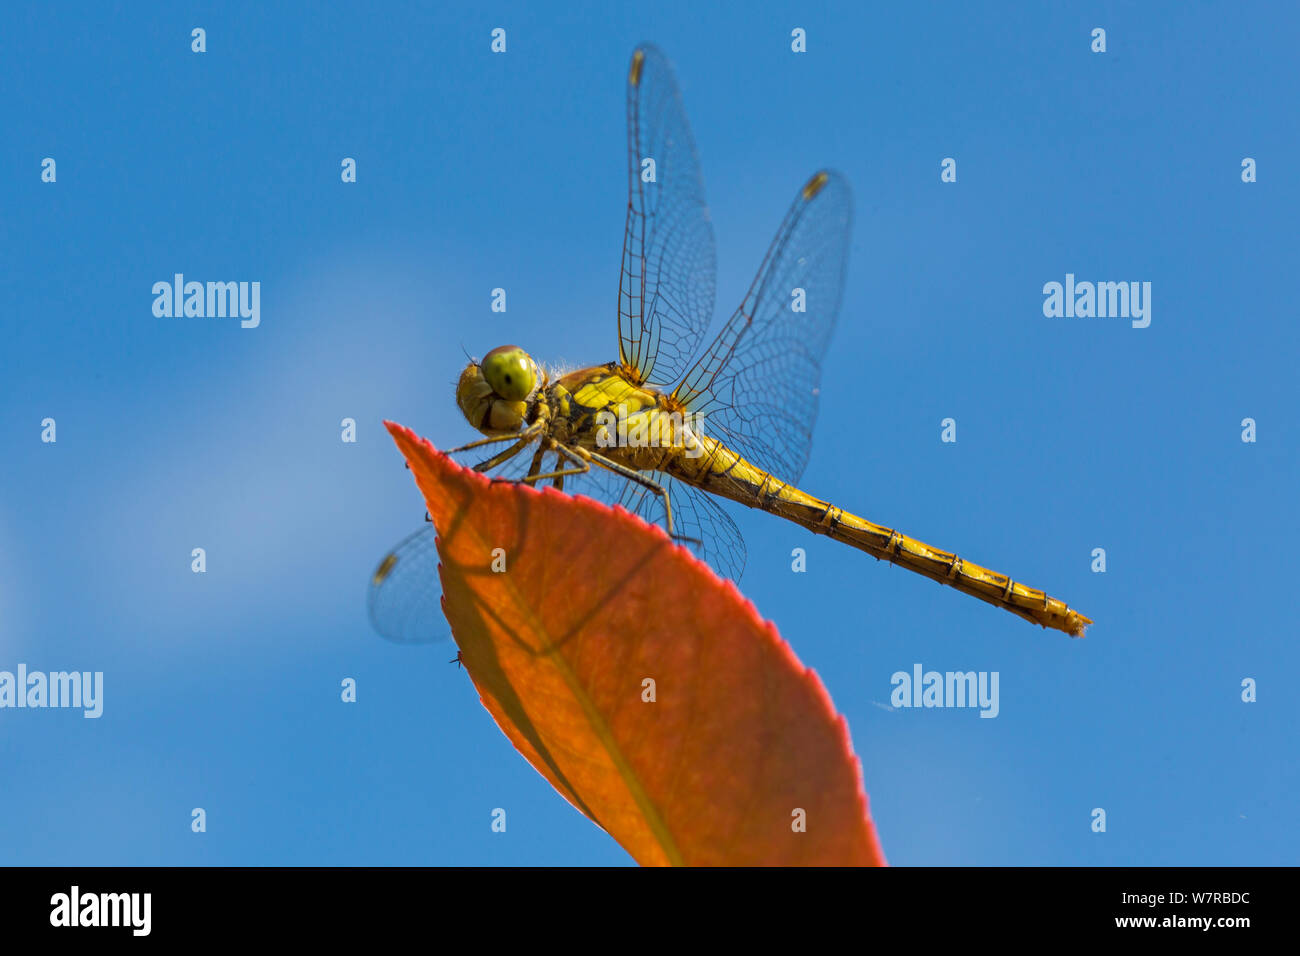 Bournemouth, Dorset UK. 7th Aug 2019. UK weather: Insects enjoy the sunshine feeding on the plants at Bournemouth.  Common Darter dragonfly, Sympetrum striolatum resting on leaf of Red Robin shrub, photinia x fraseri looking up against blue sky. Credit: Carolyn Jenkins/Alamy Live News Stock Photo